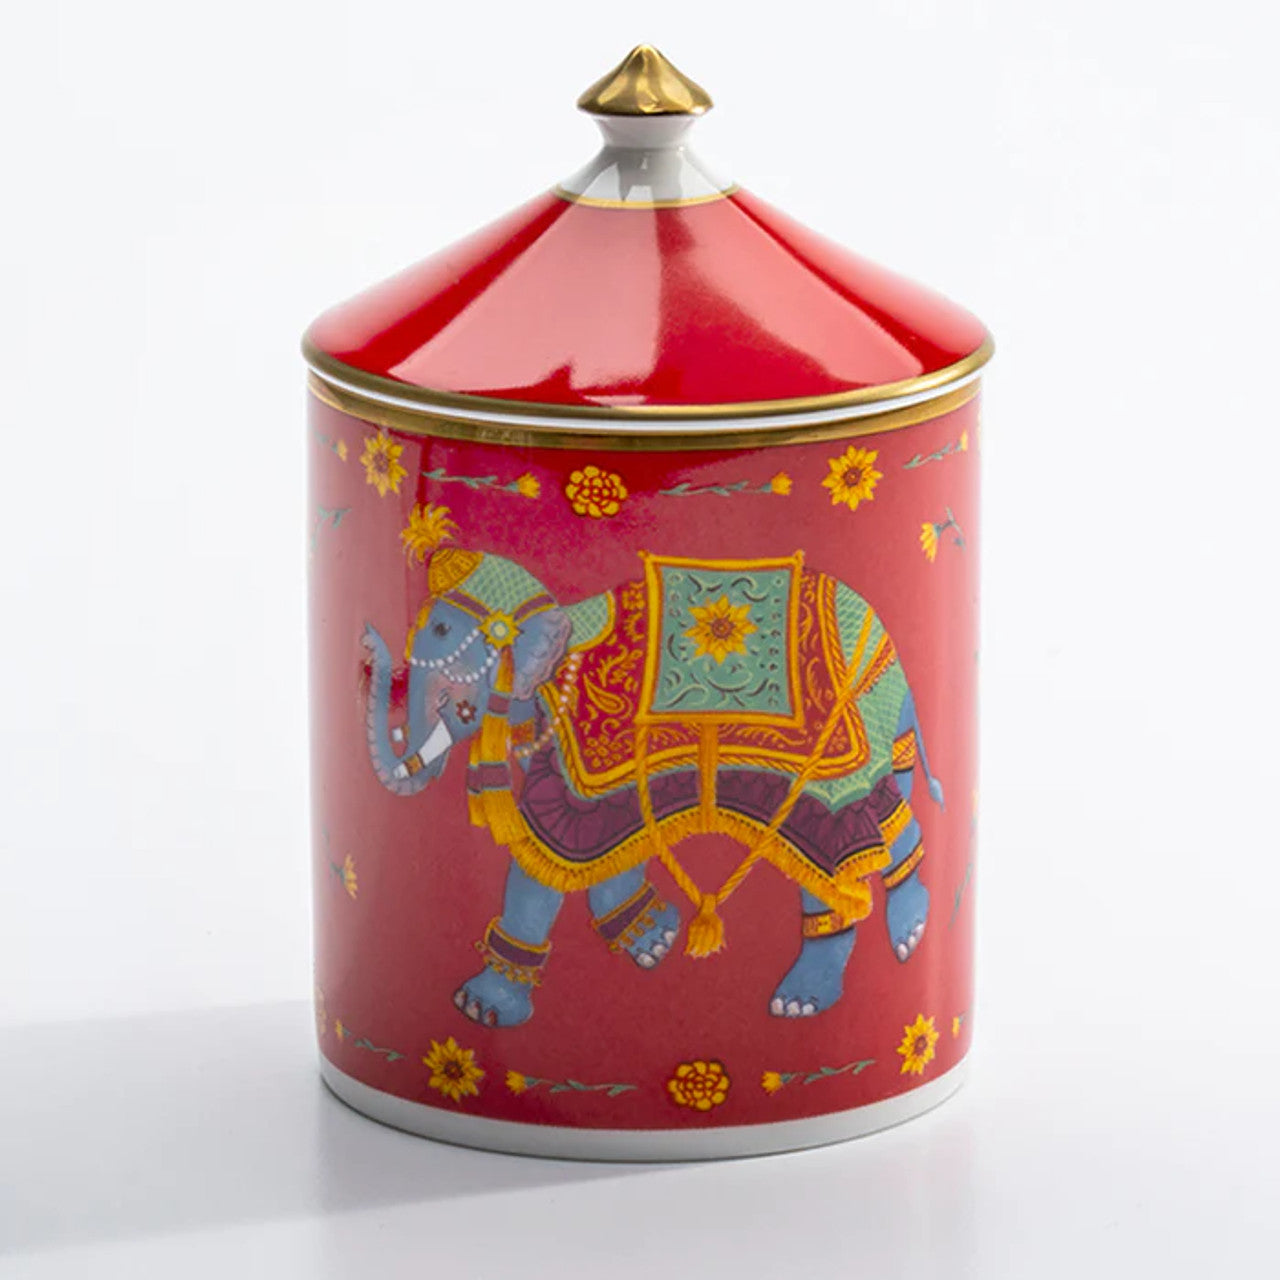 Halcyon Days Red Ceremonial Indian Elephant Rose Lidded Candle